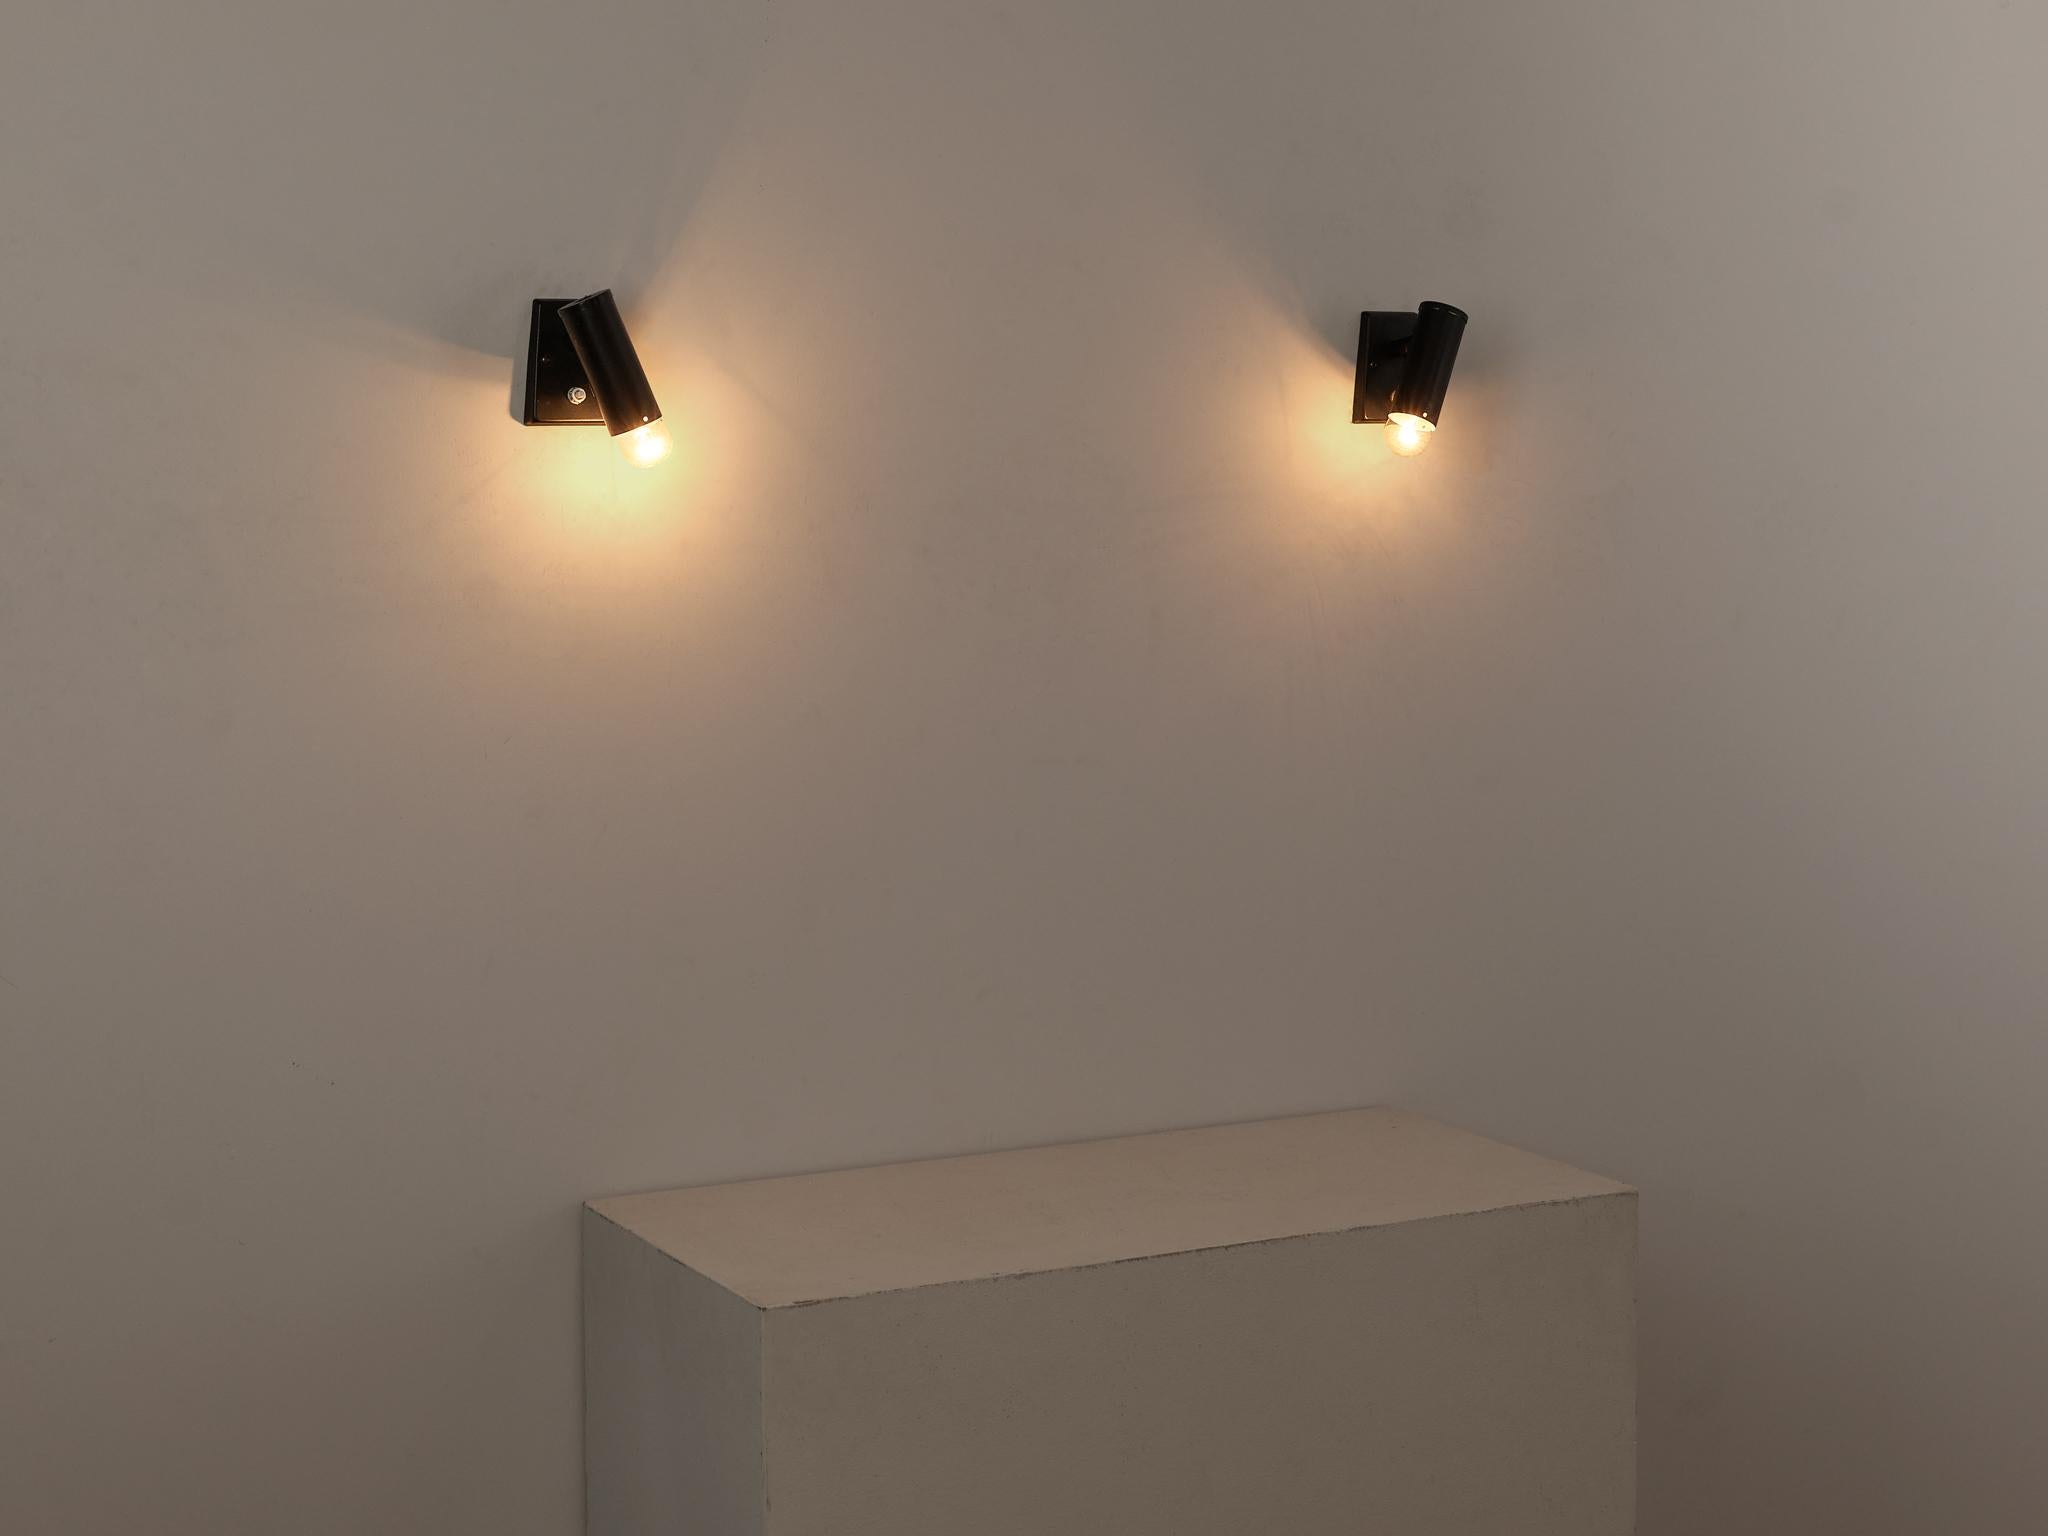 Pair of wall lights, coated metal and aluminum, Europe, 1960s

Pair of sleek and modern spot light fixtures that can be attached to the wall to enlighten a space or room. The rotatable cylindrical-shaped shade allows the user to direct the light